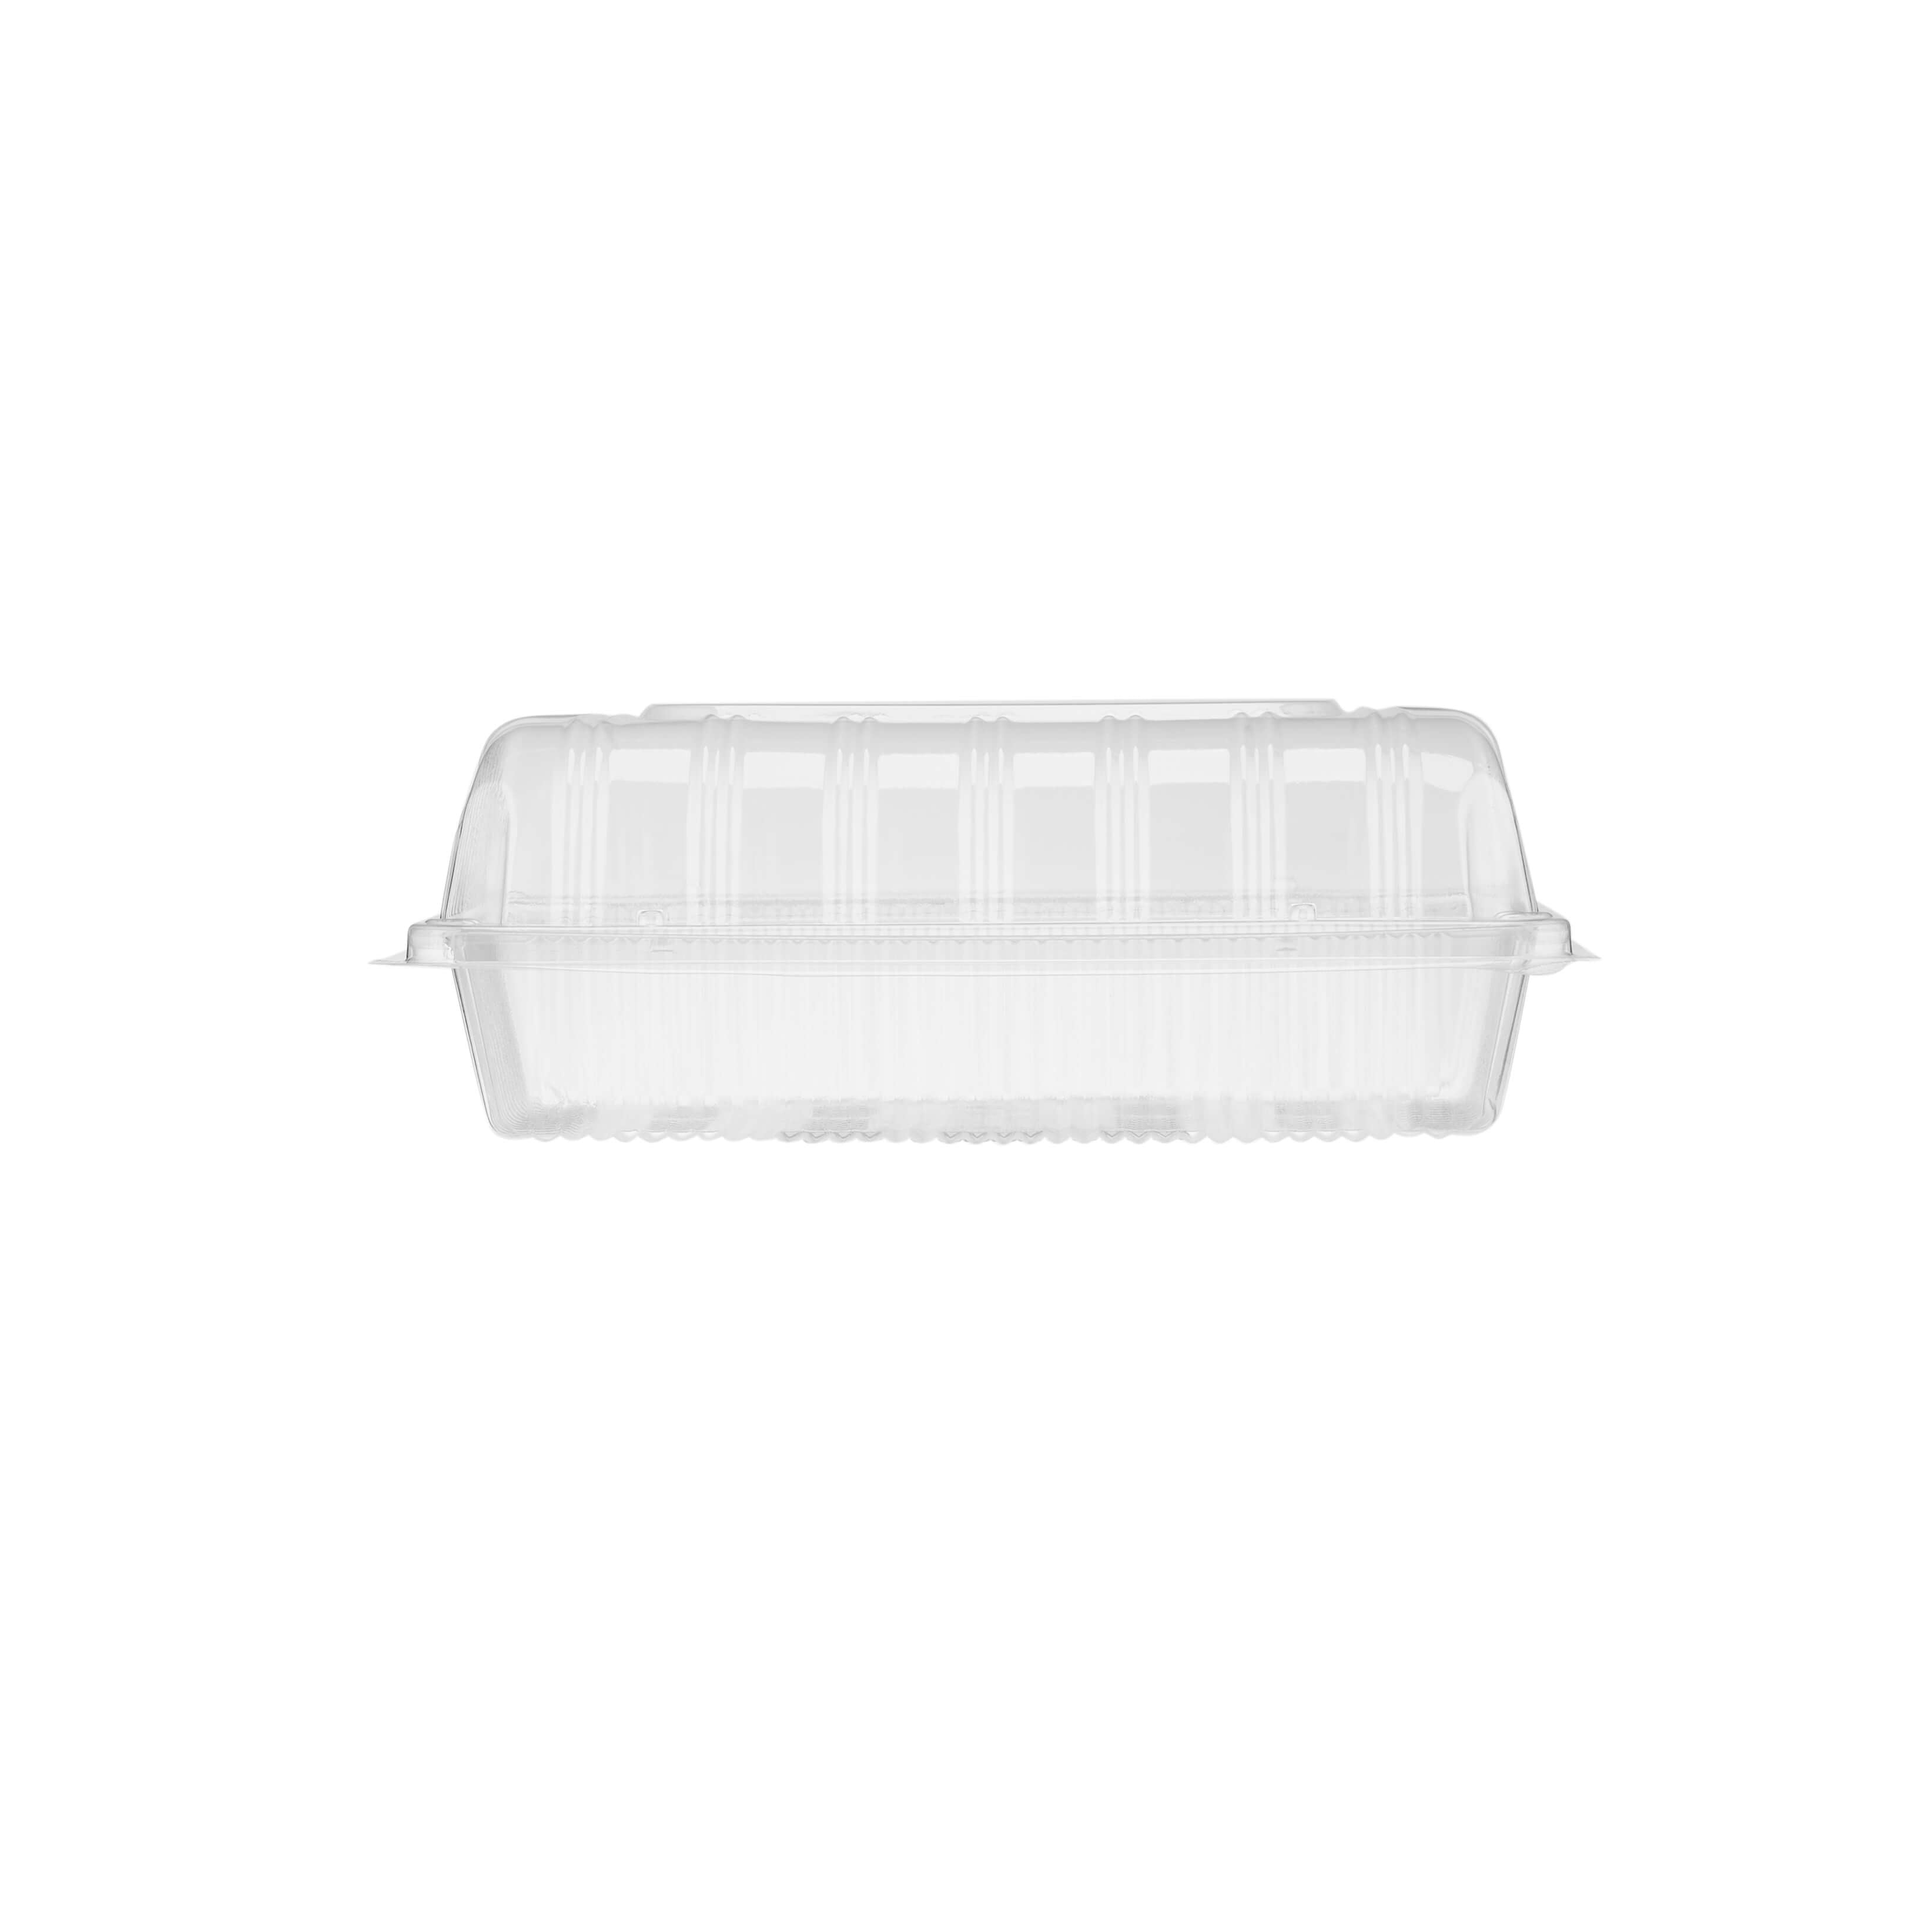 Transparent hinged container - Hotpack Global